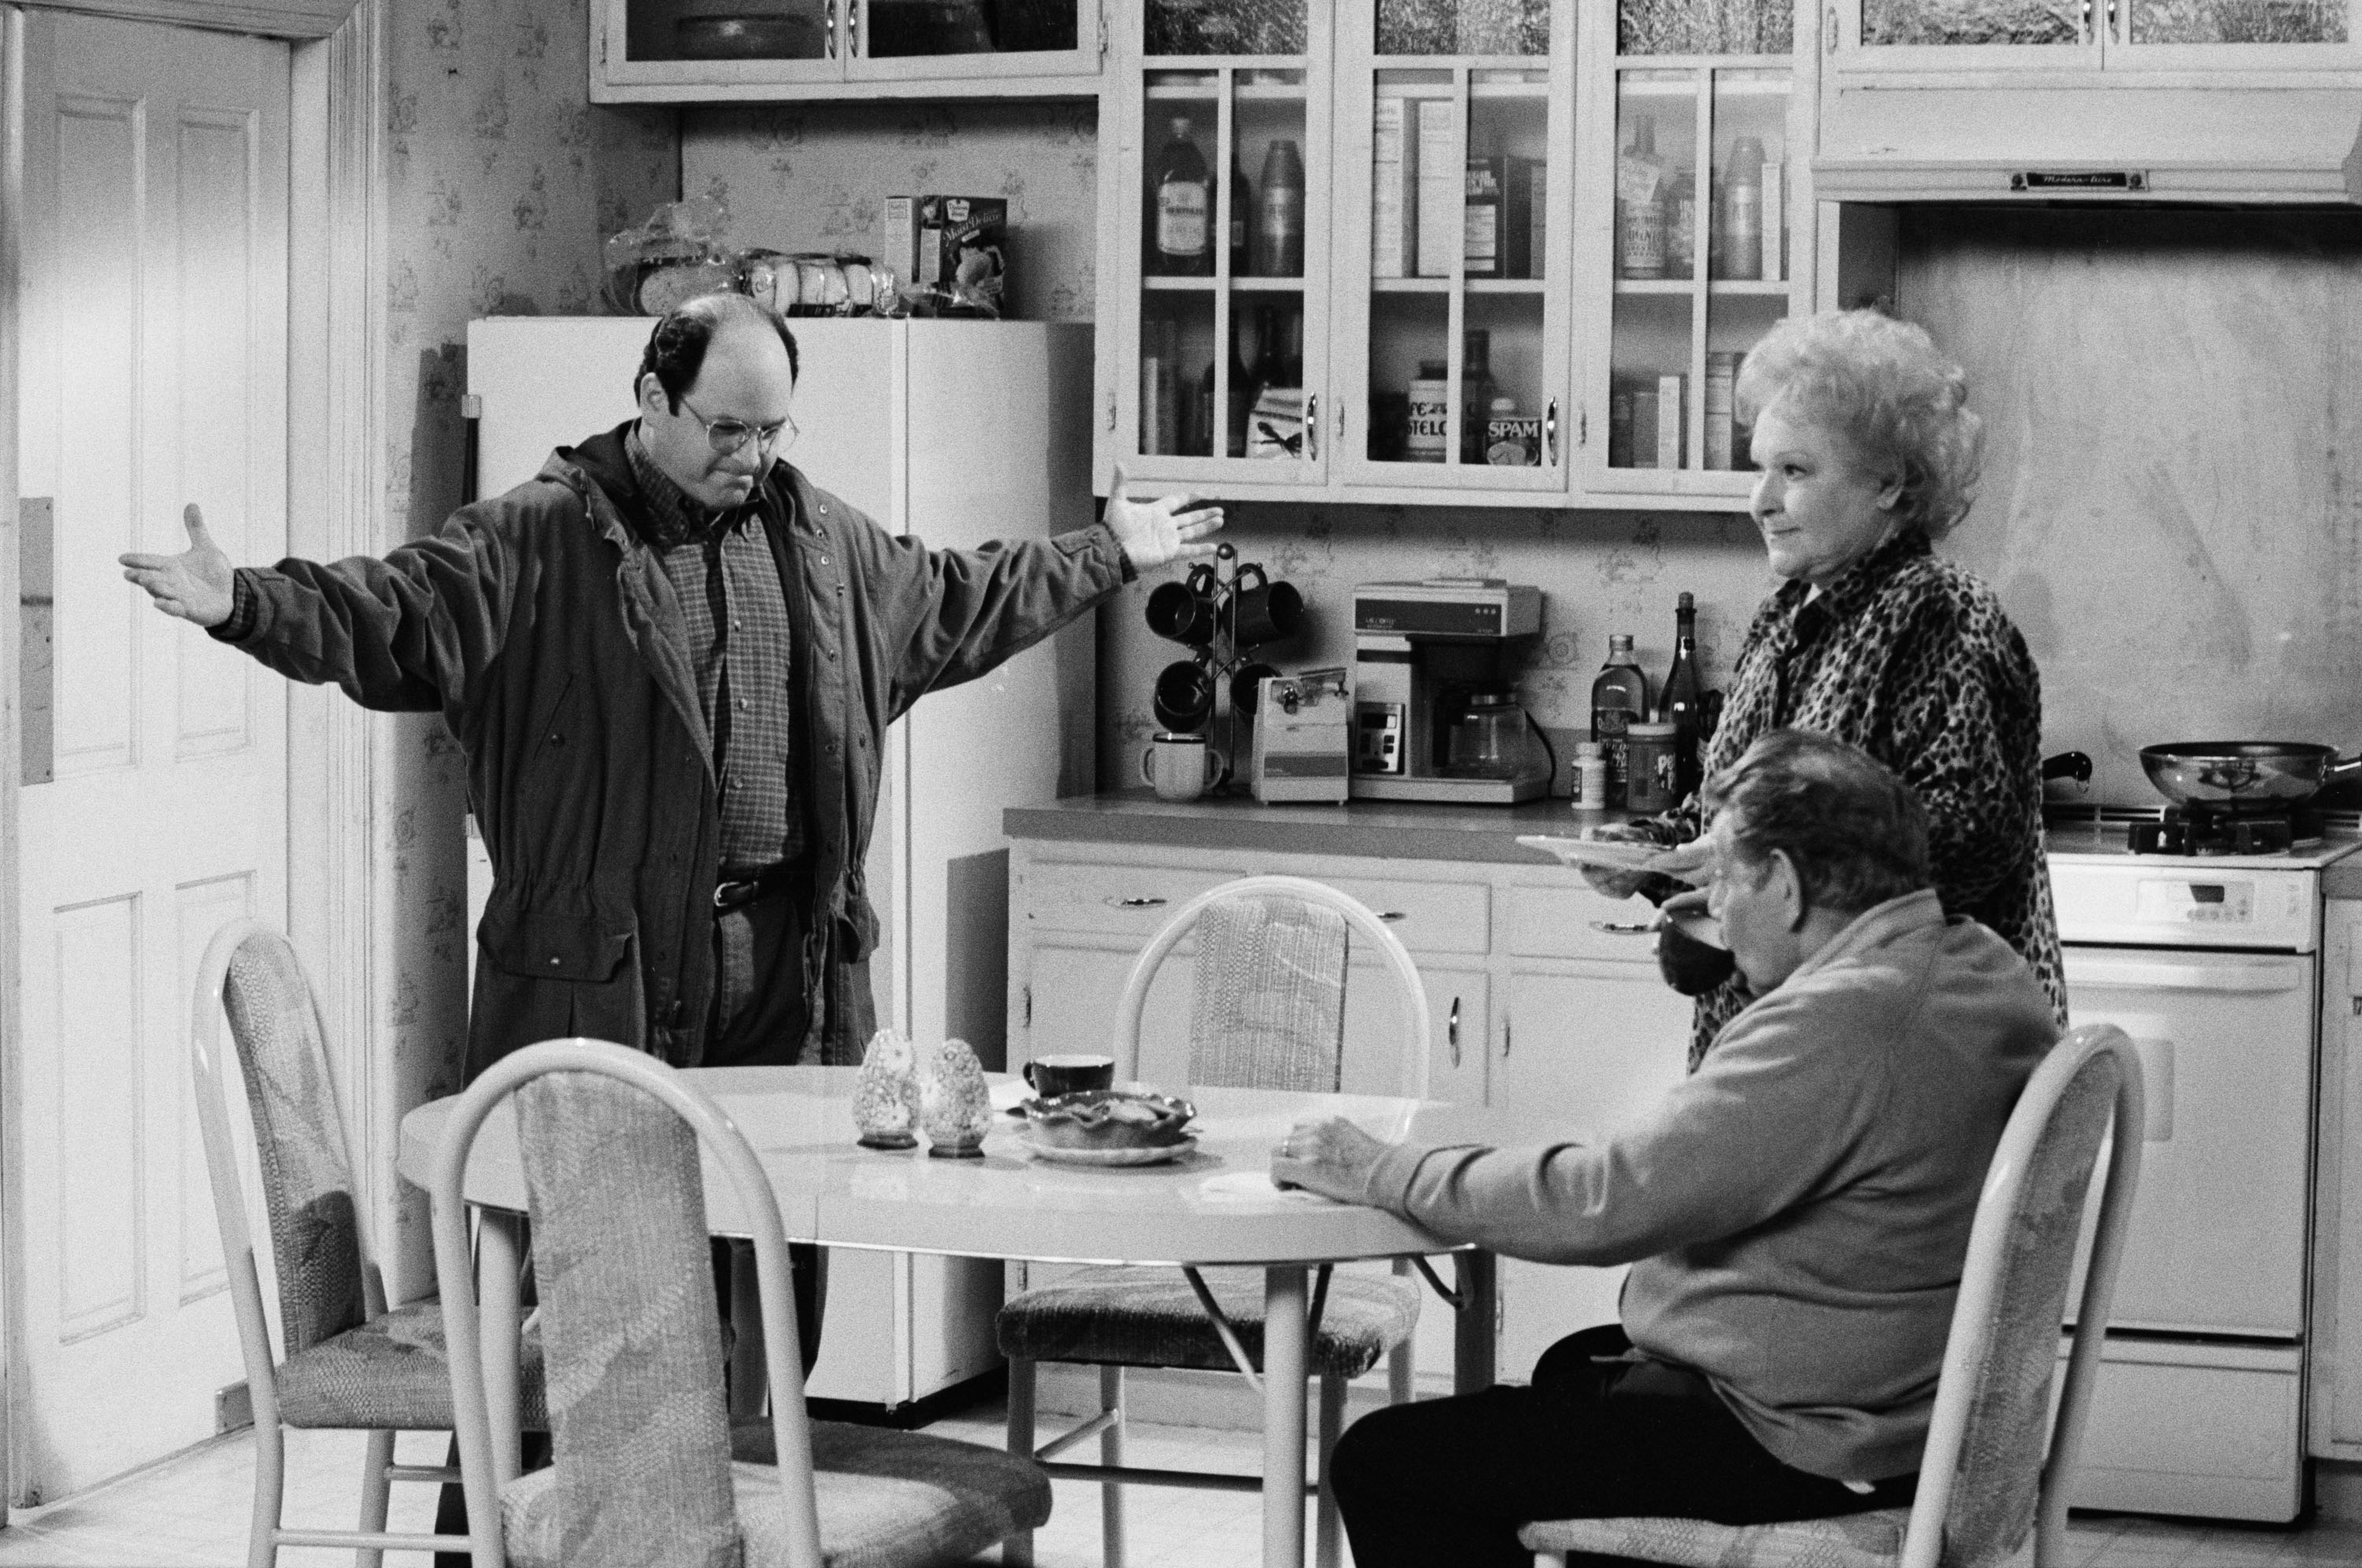 Jason Alexander as George Costanza, with Estelle Harris as Estelle Costanza and Jerry Stiller as Frank Costanza on the set of 'Seinfeld'